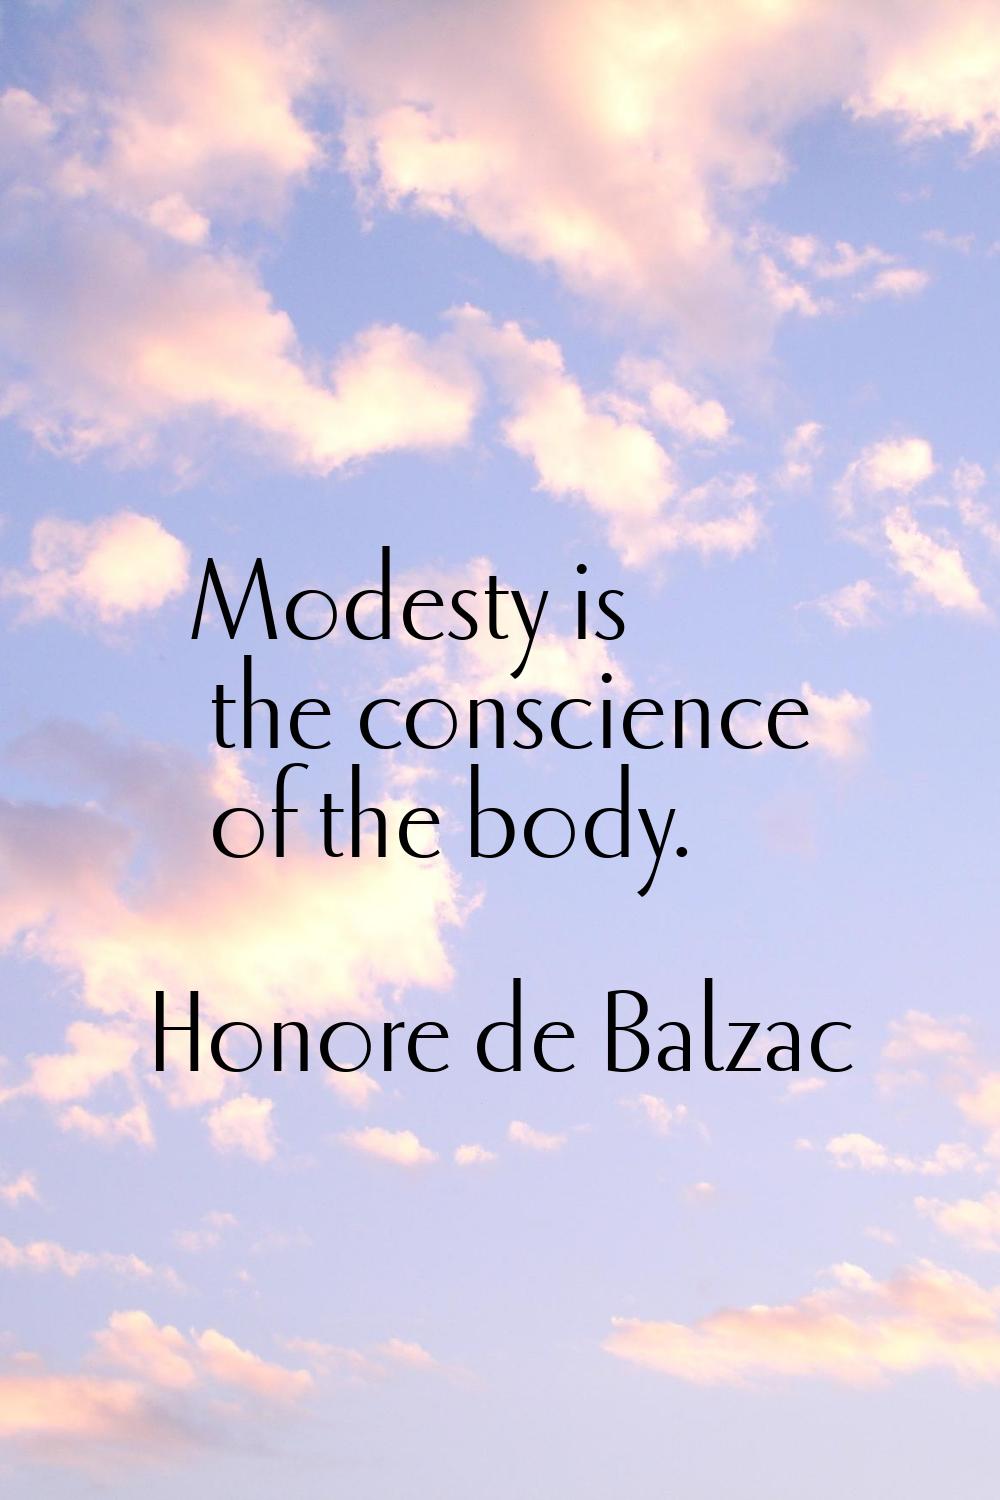 Modesty is the conscience of the body.